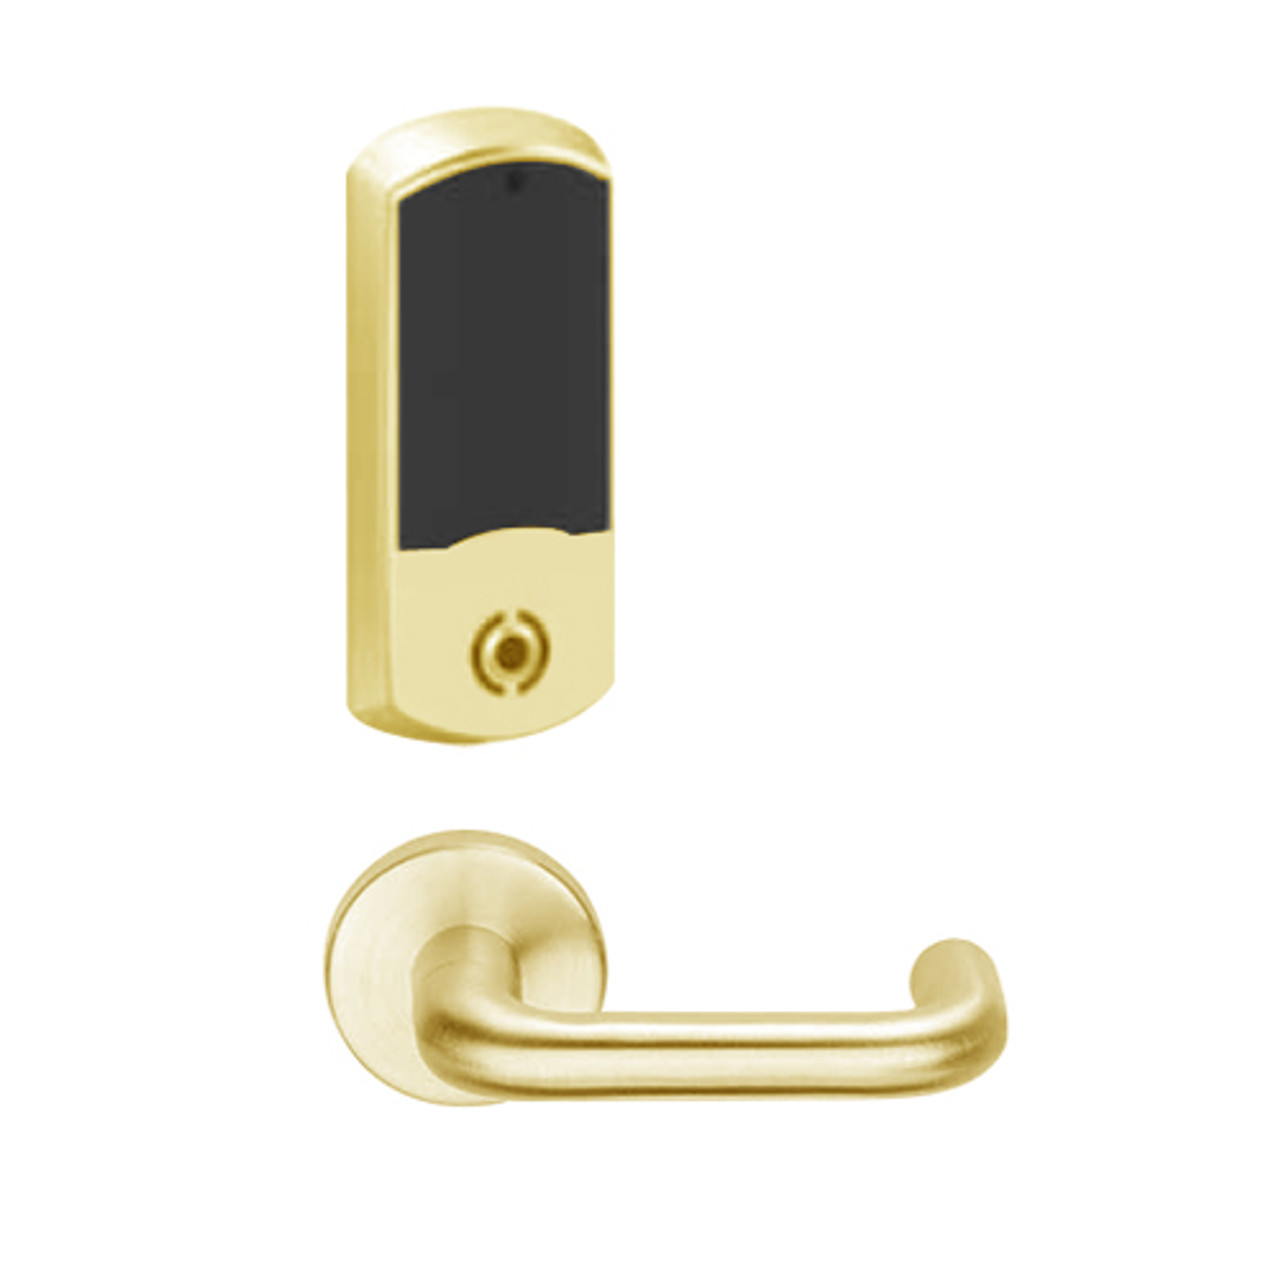 LEMS-GRW-L-03-605-00B Schlage Less Cylinder Storeroom Wireless Greenwich Mortise Lock with LED Indicator and Tubular Lever in Bright Brass